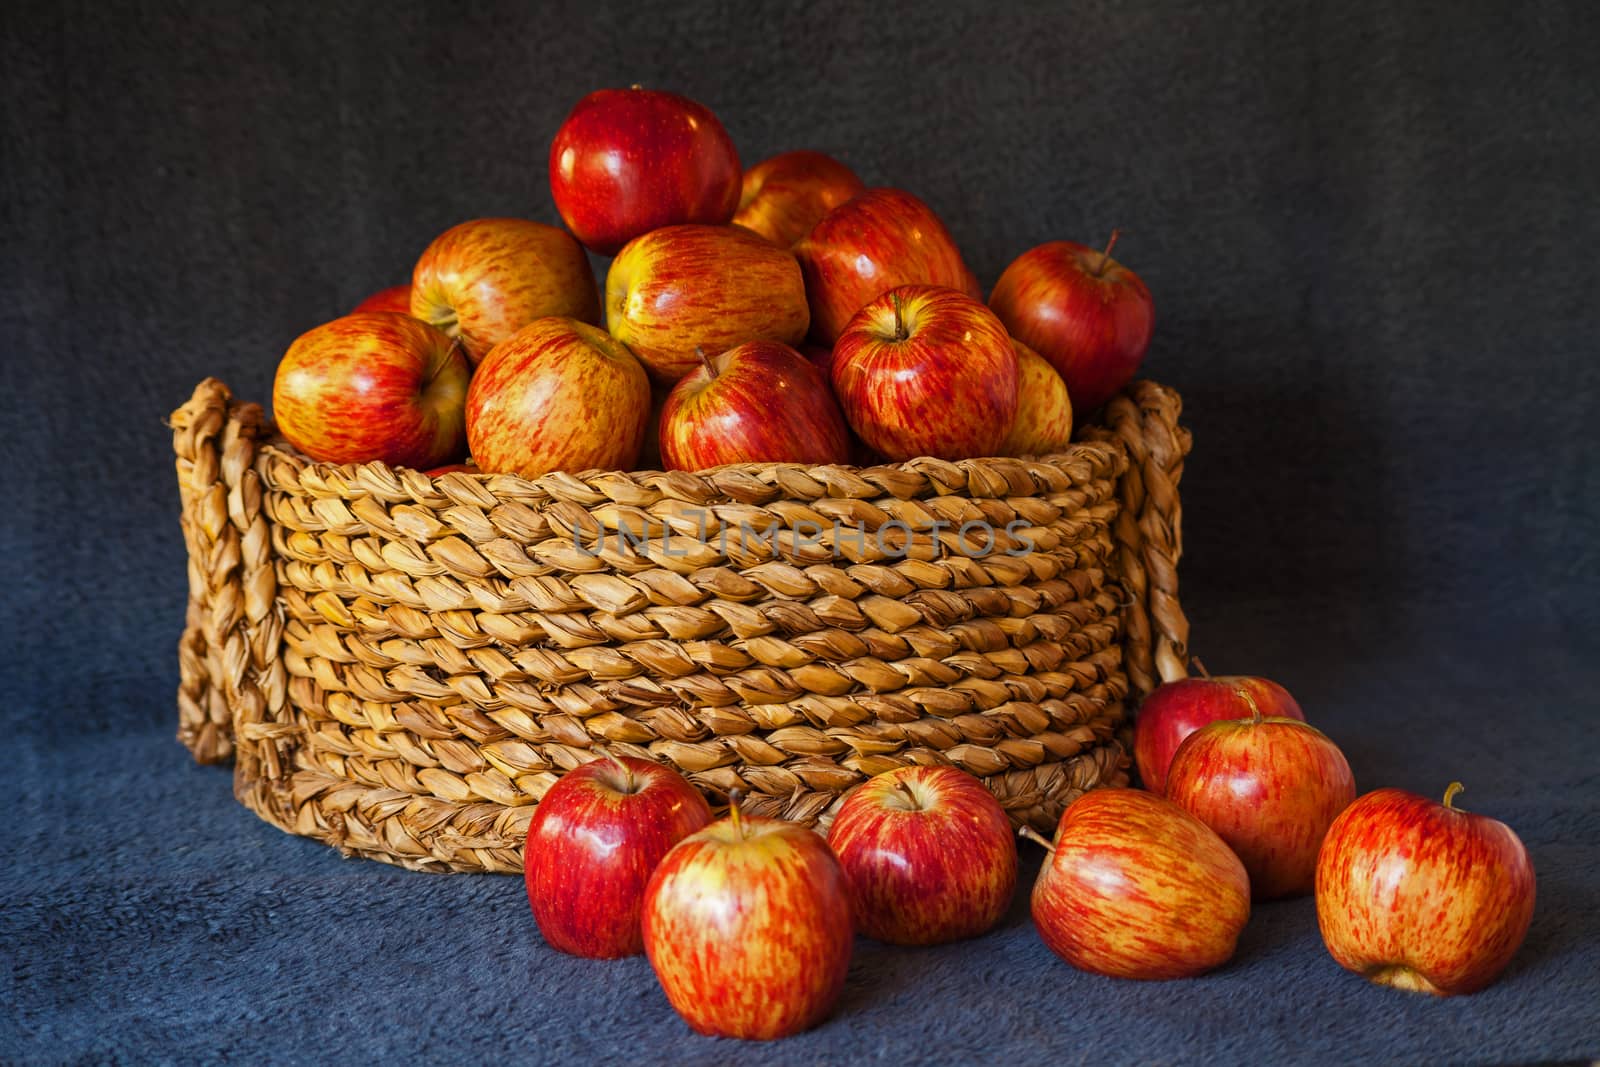 A grass  basket of red Starking apples 2 by kobus_peche